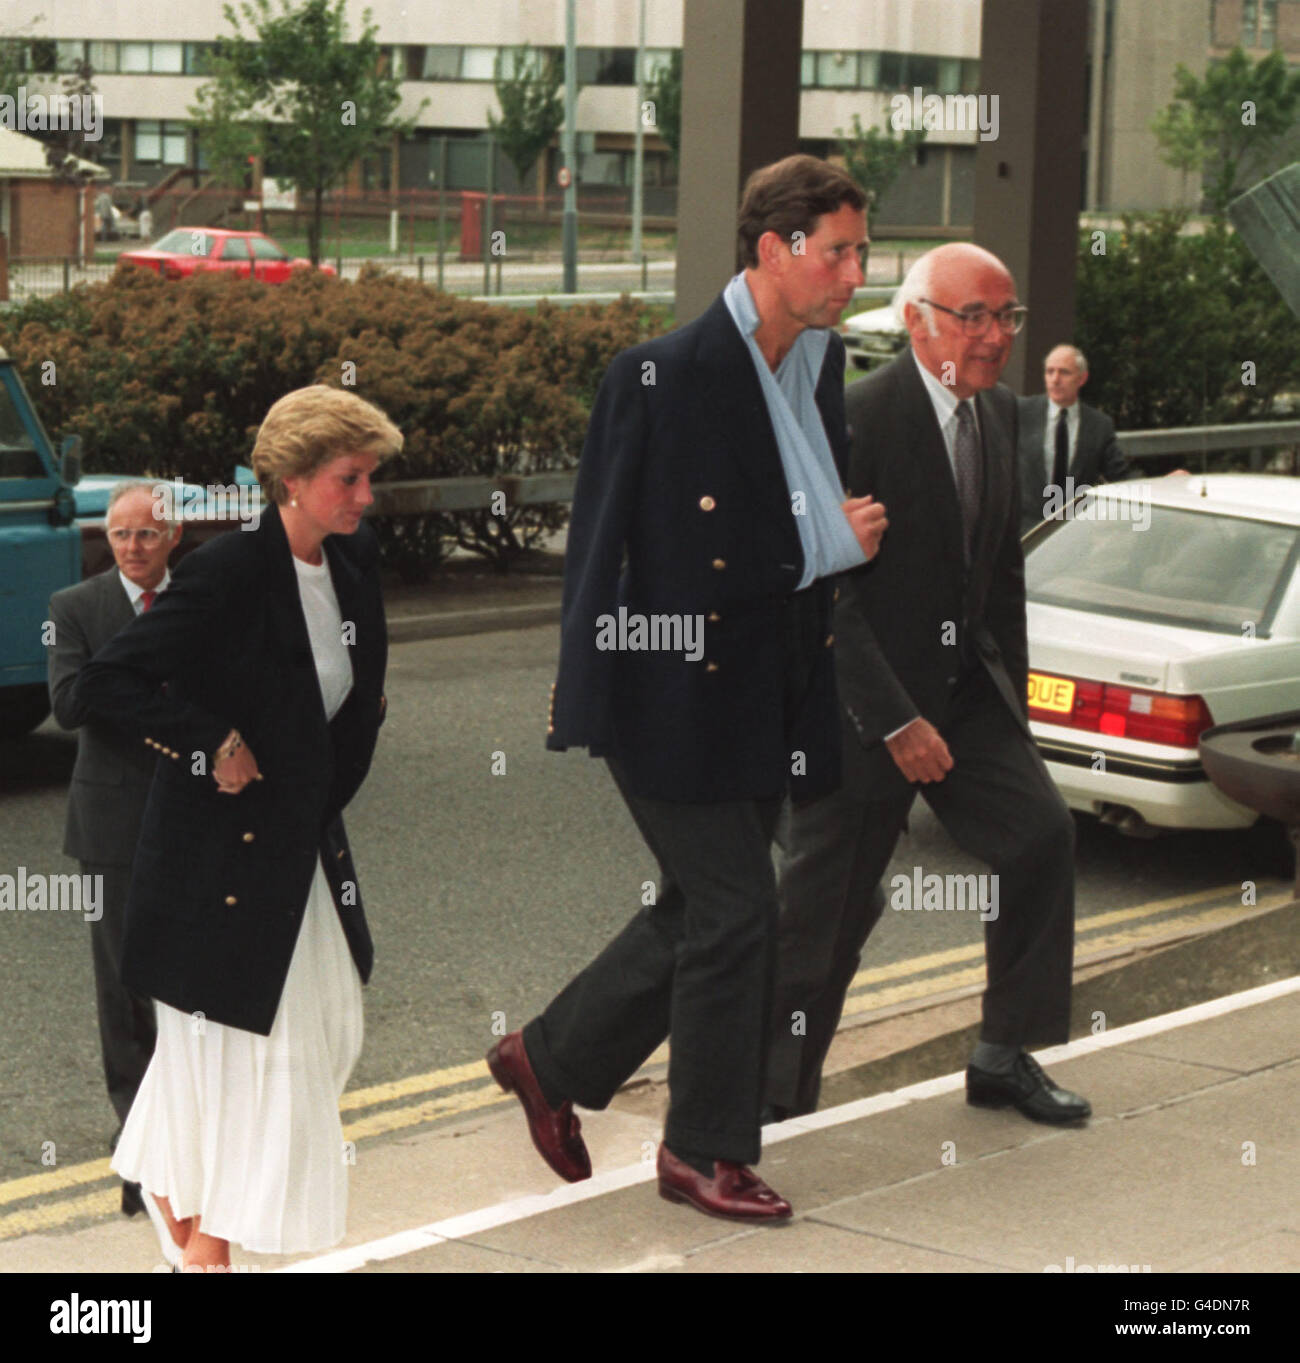 PA NEWS PHOTO 31/8/90 PRINCE AND PRINCESS  OF WALES WITH DAVID WHITE NOTTS HEALTH AUTHORITY CHAIRMAN ARRIVE AT QUEENS MEDICAL CENTRE IN NOTTINGHAM WHERE THE PRINCE WAS TO UNDERGO FURTHER SURGERY ON HIS ARM. Stock Photo